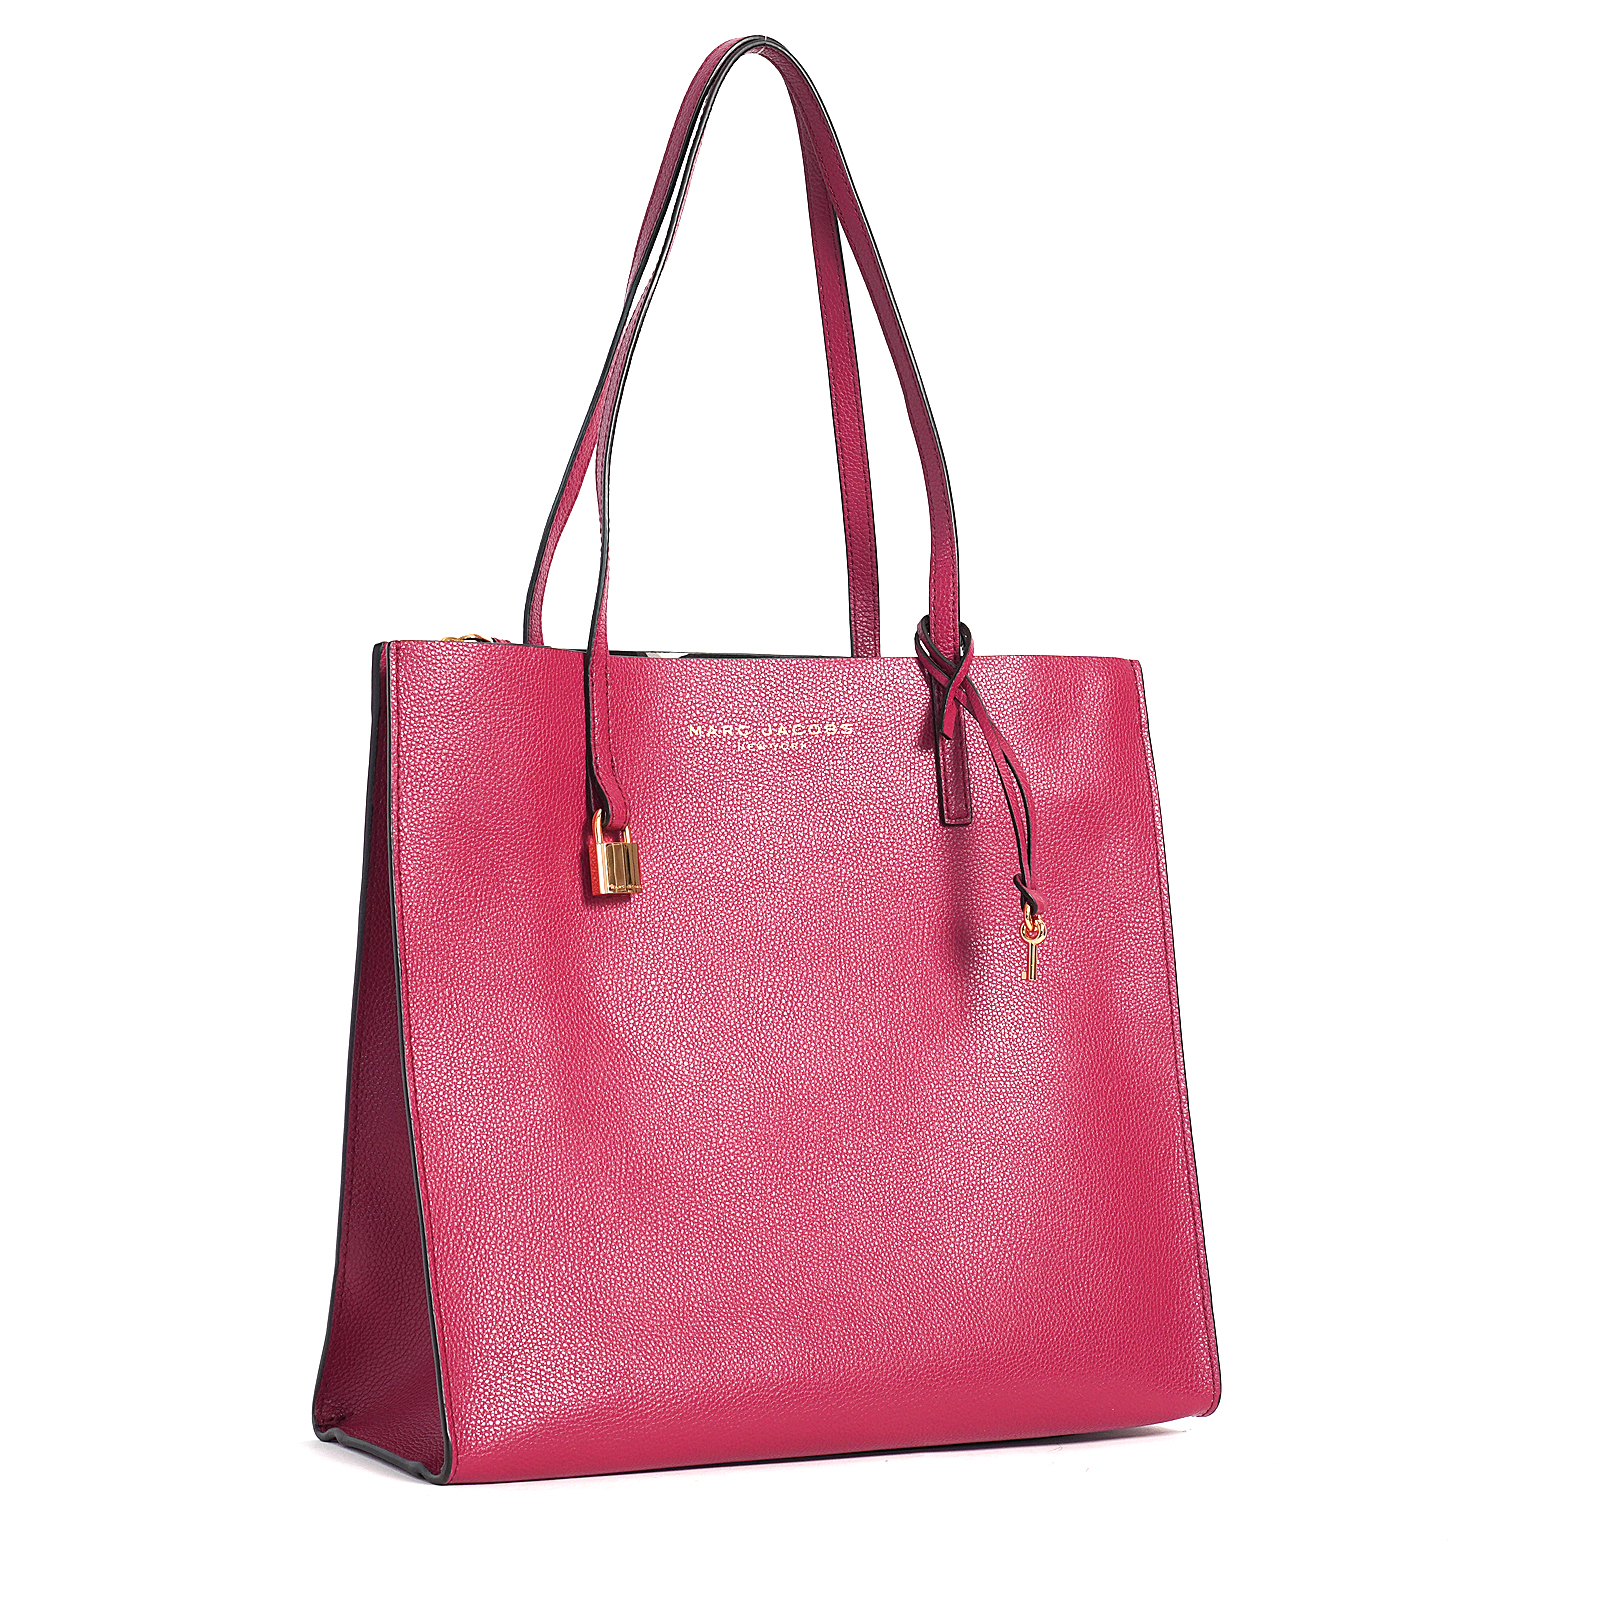 Marc Jacobs Grind Tote Bag Cherry - Averand